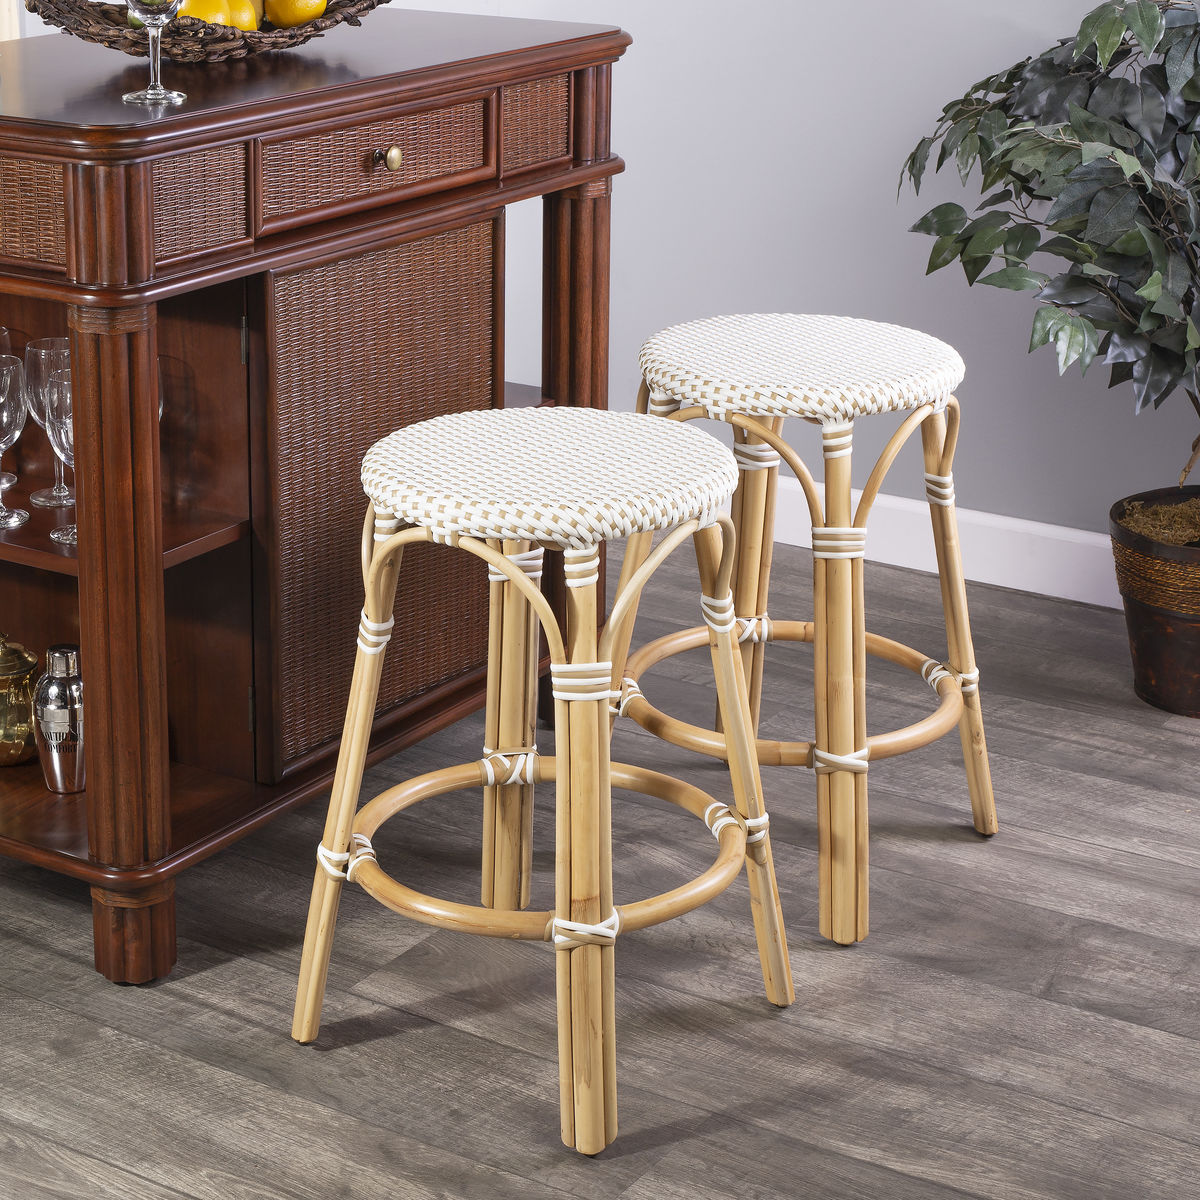 Butler Specialty 9371415 Tobias Beige and White Rattan Counter Stool